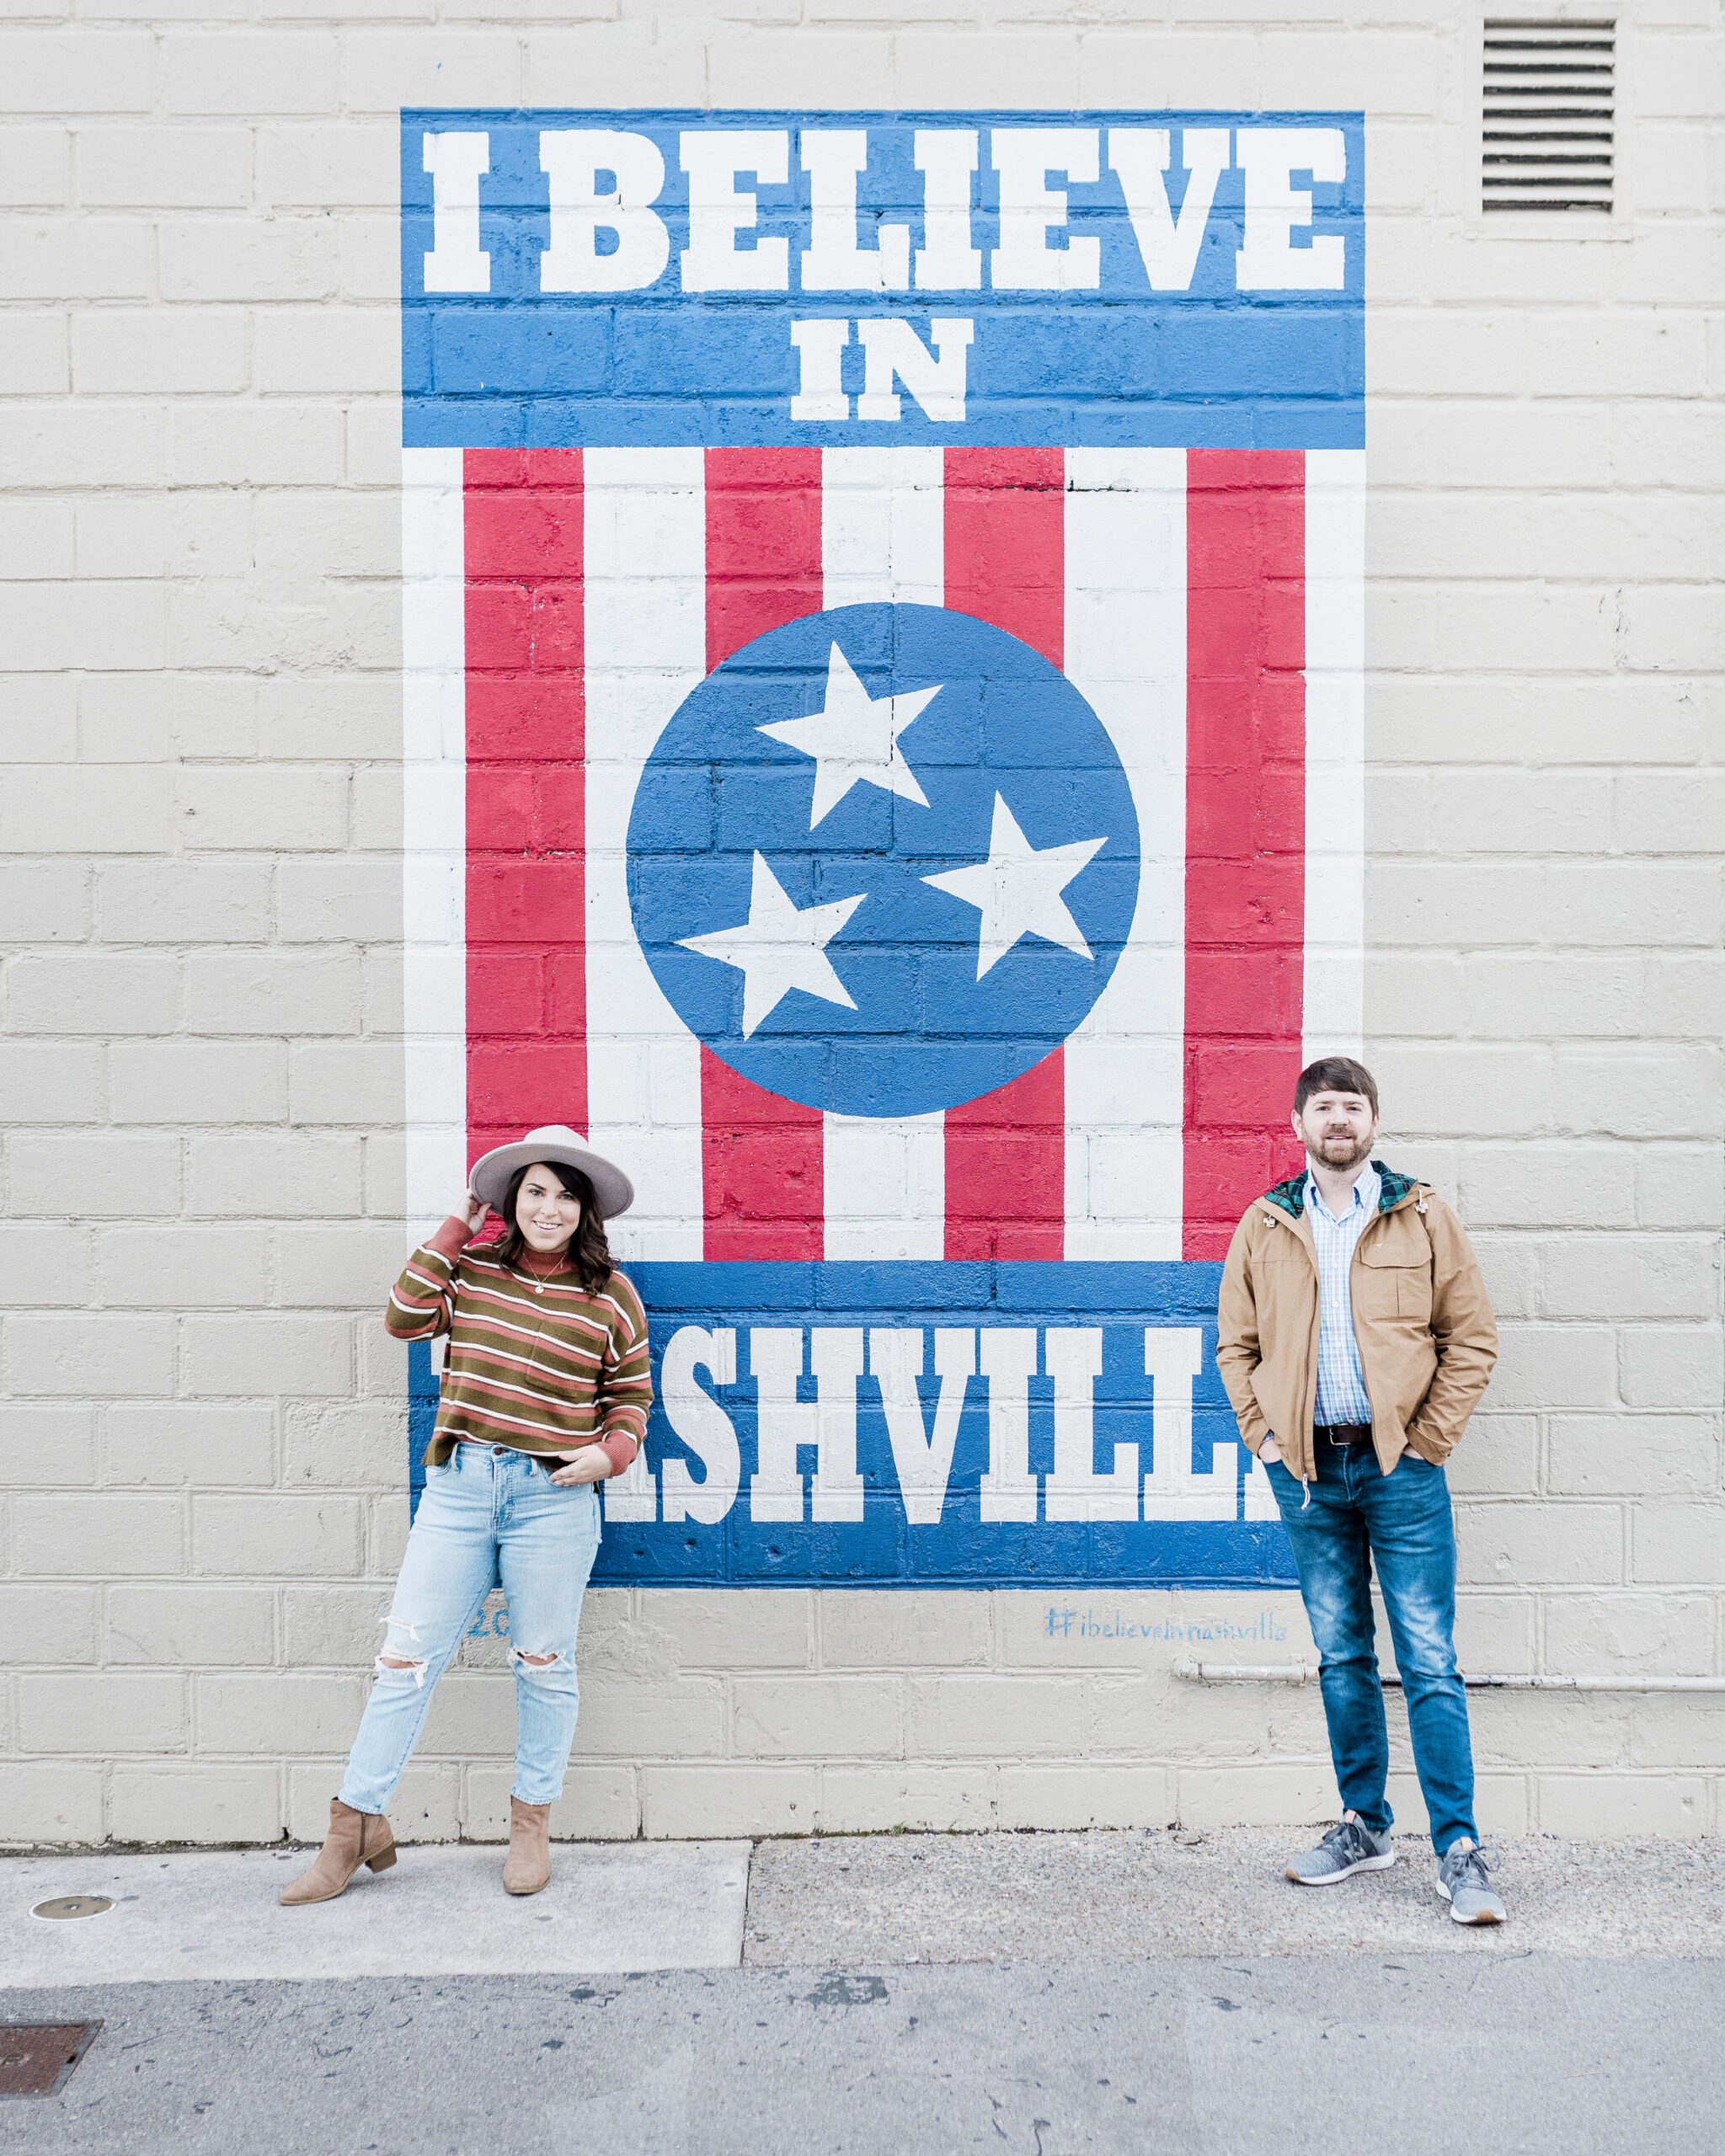 I believe in Nashville wall Mural in nashville tennessee